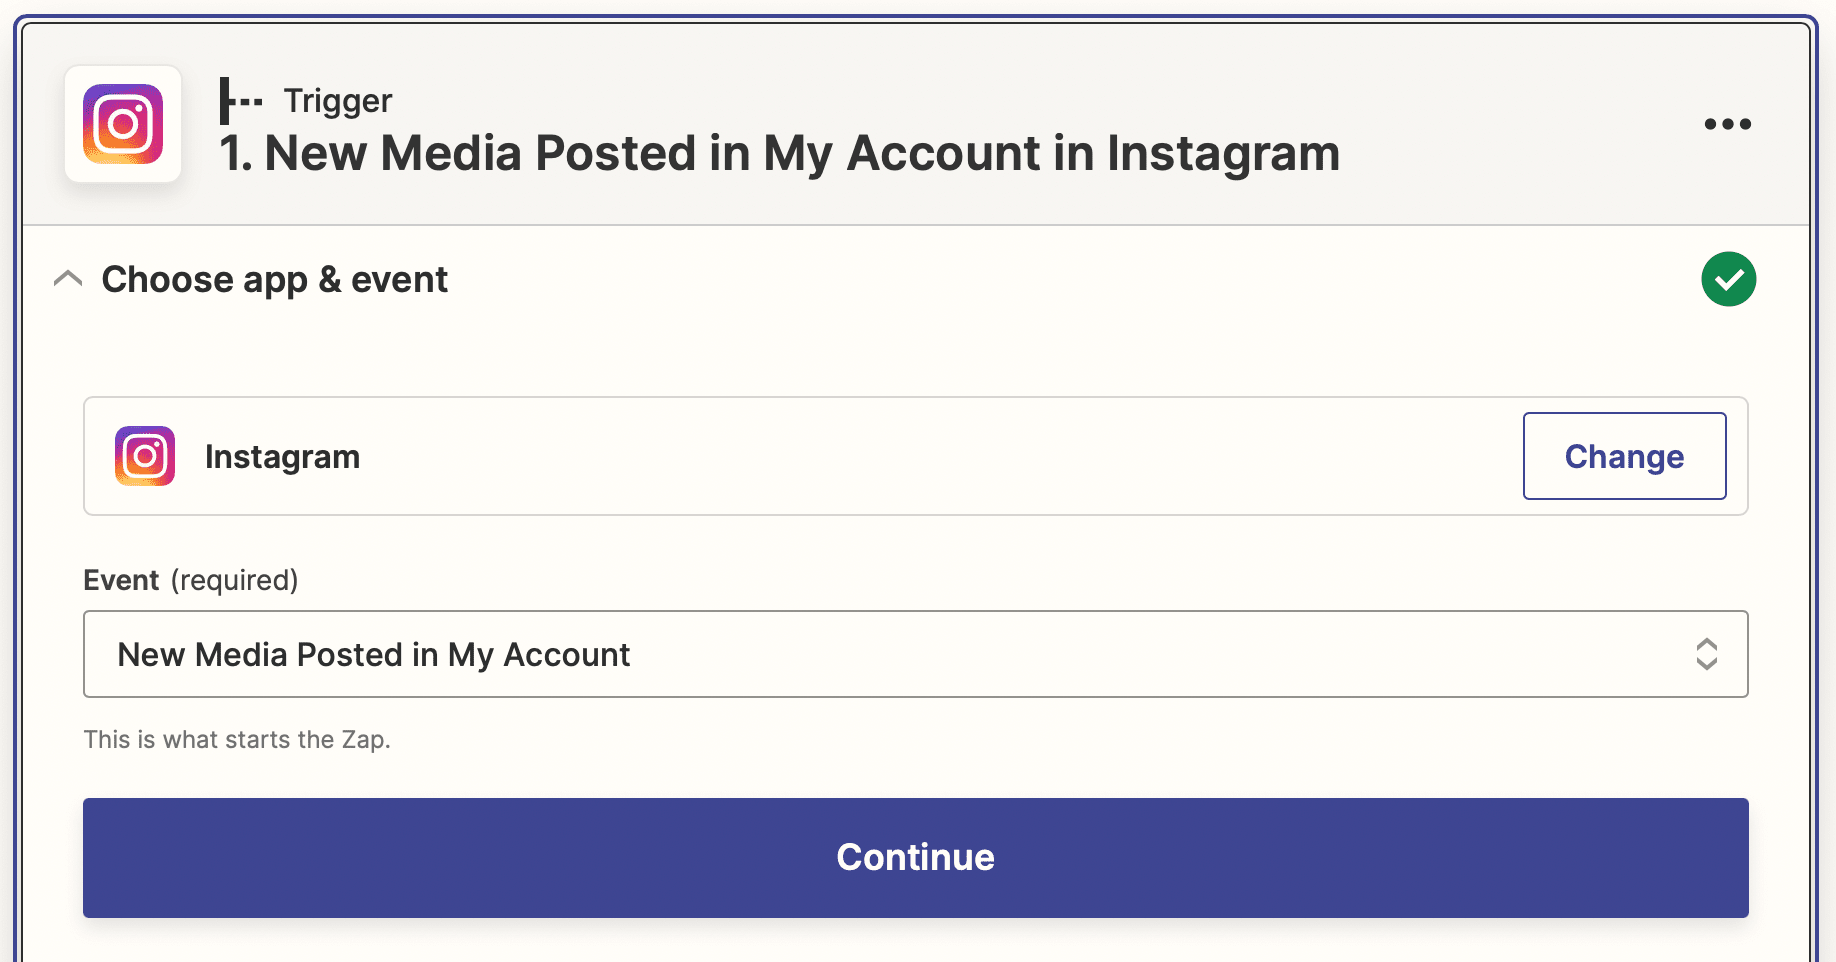 Screenshot of Zapier Instagram new media posted in my account trigger